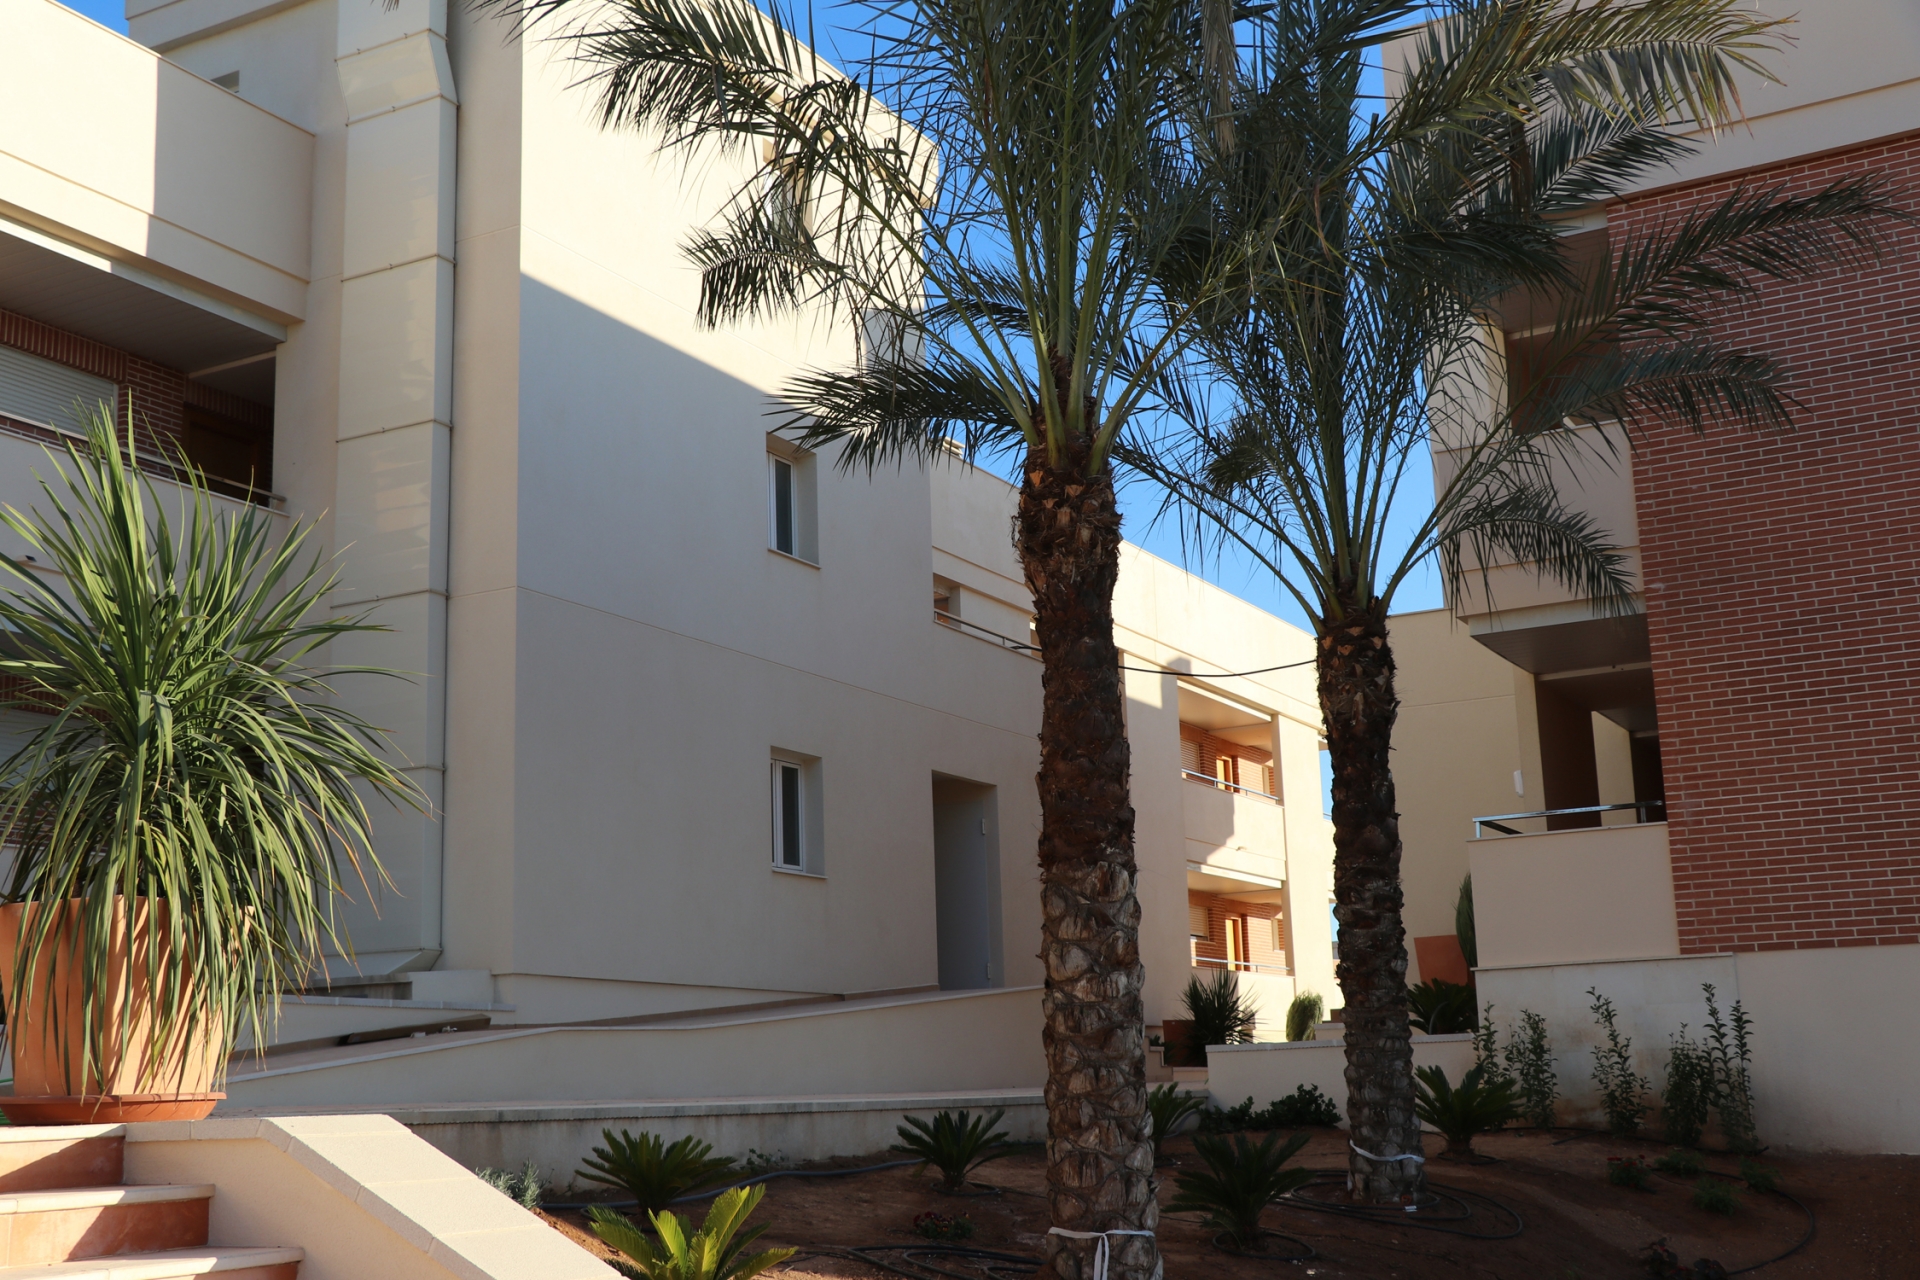 Property Sold - Apartment for sale - Gran Alacant - Gran Alacant central